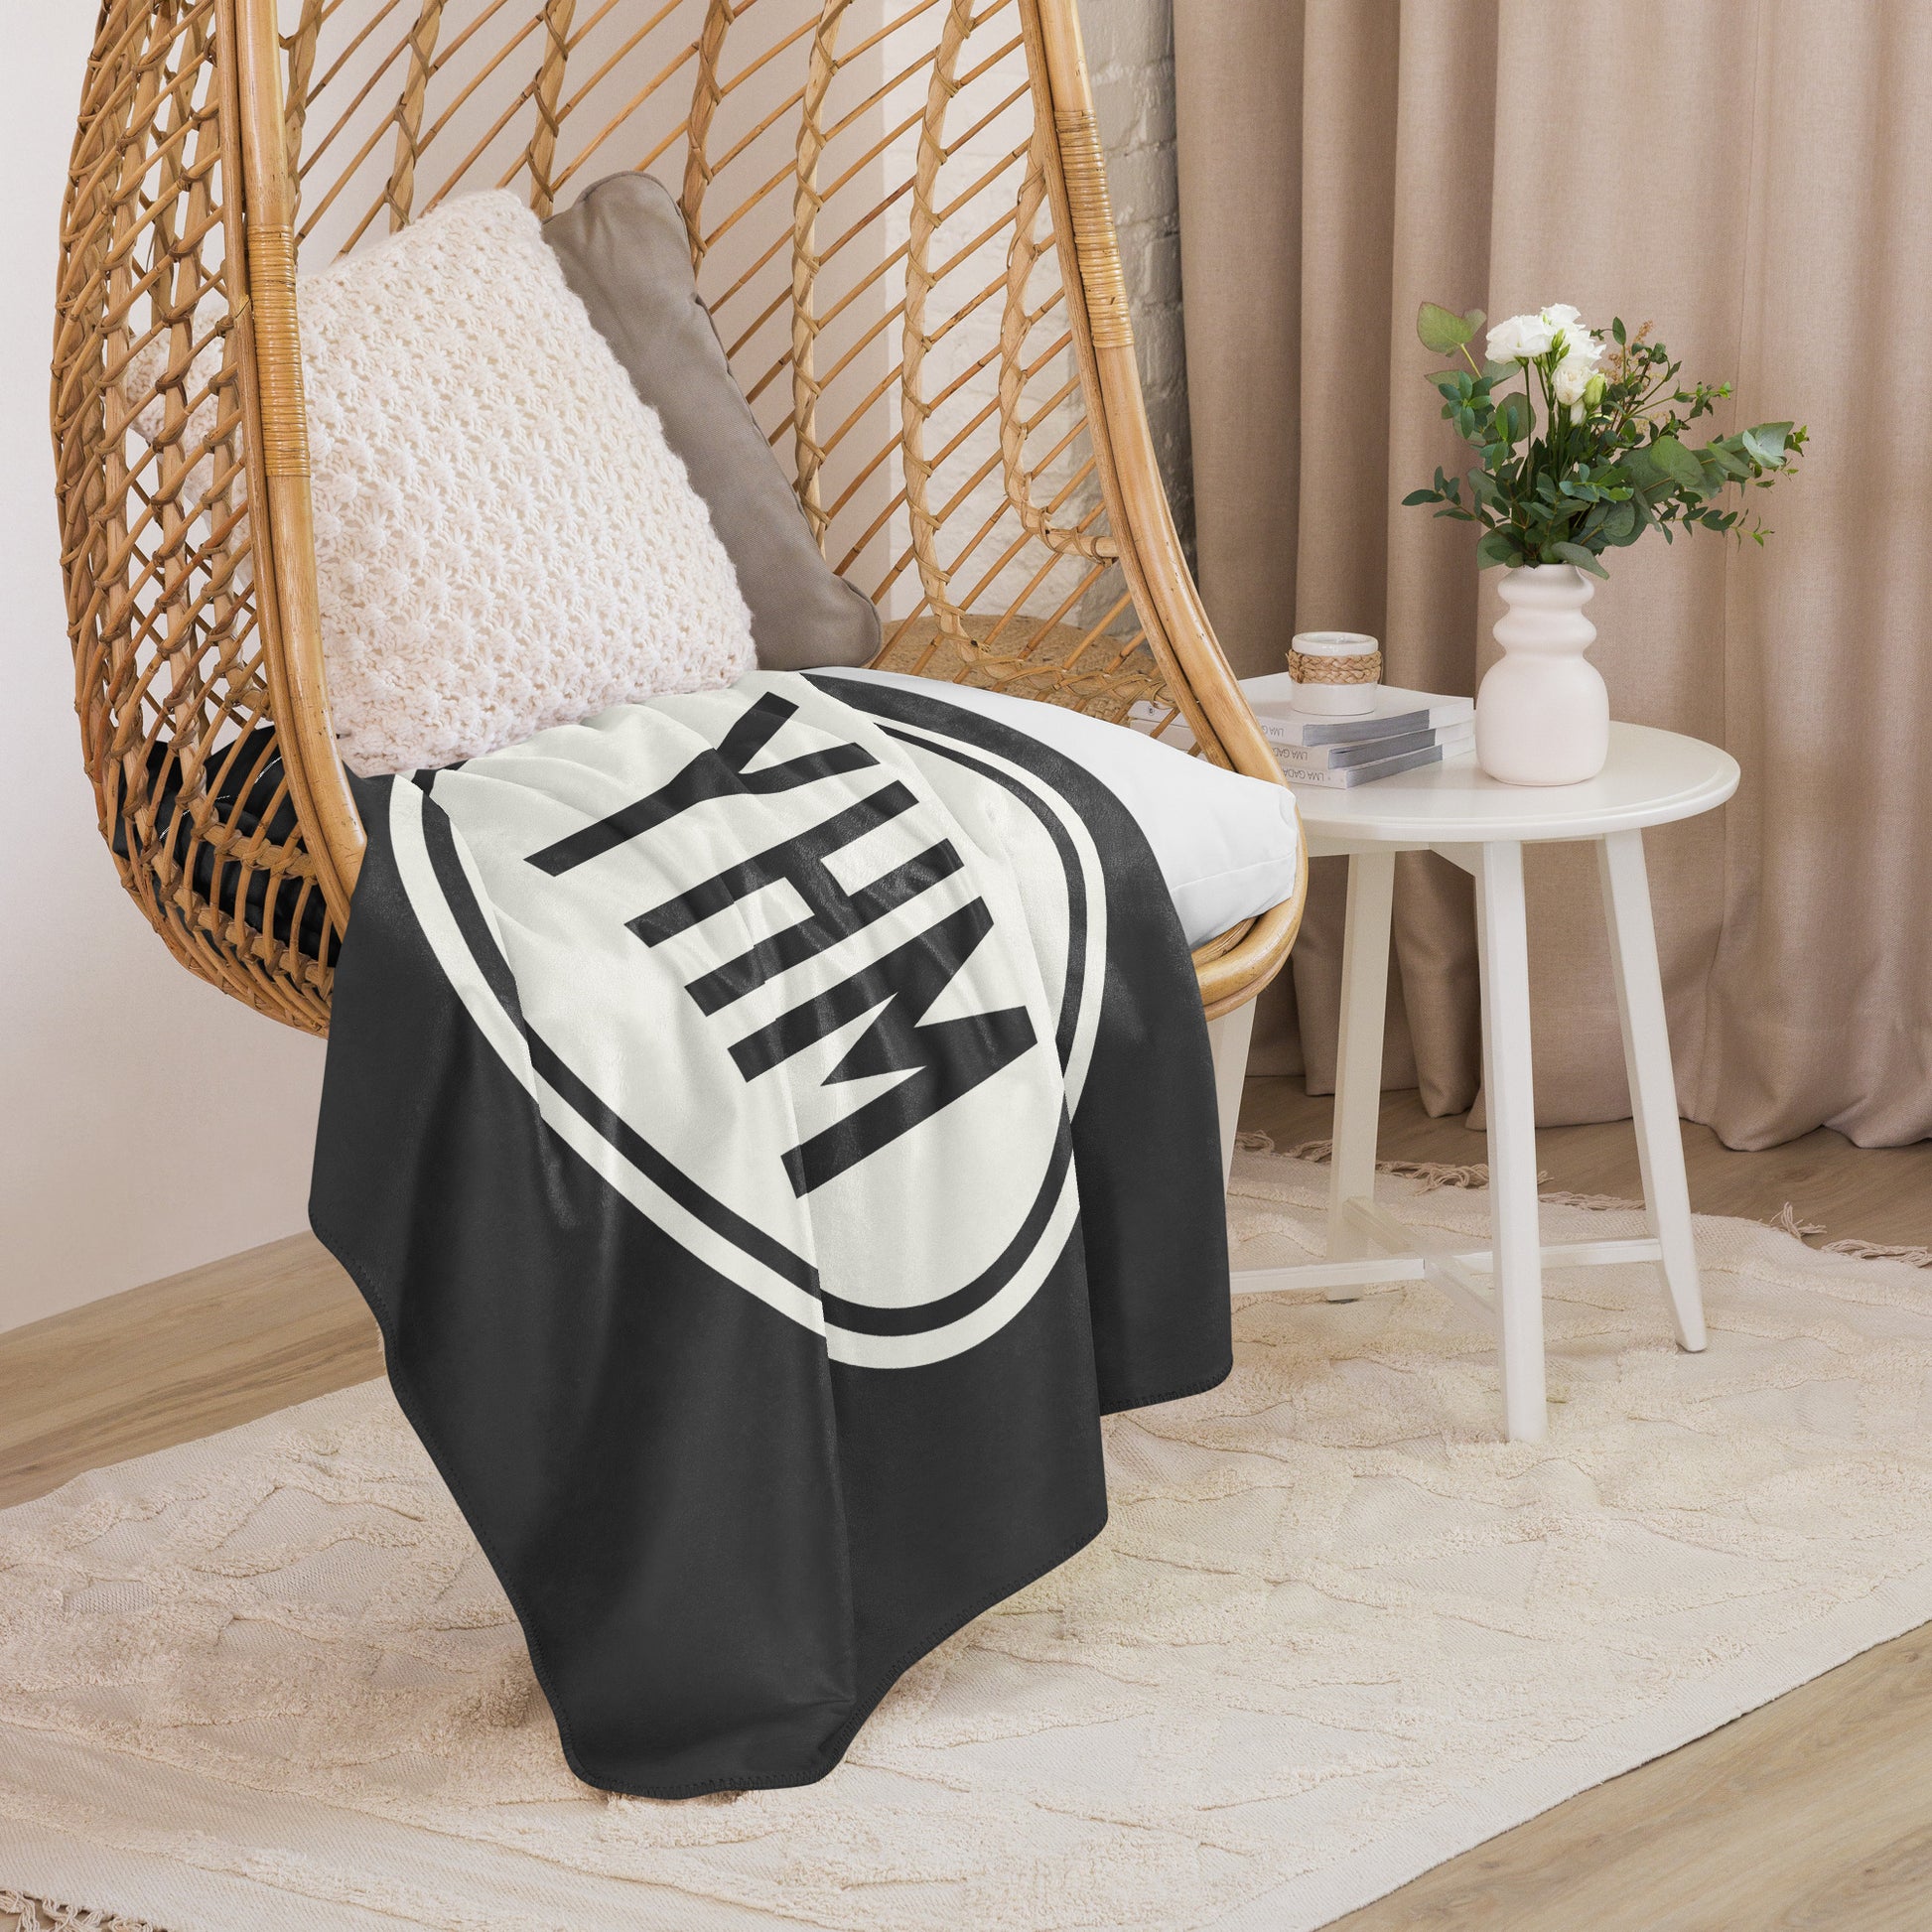 Unique Travel Gift Sherpa Blanket - White Oval • YHM Hamilton • YHM Designs - Image 06